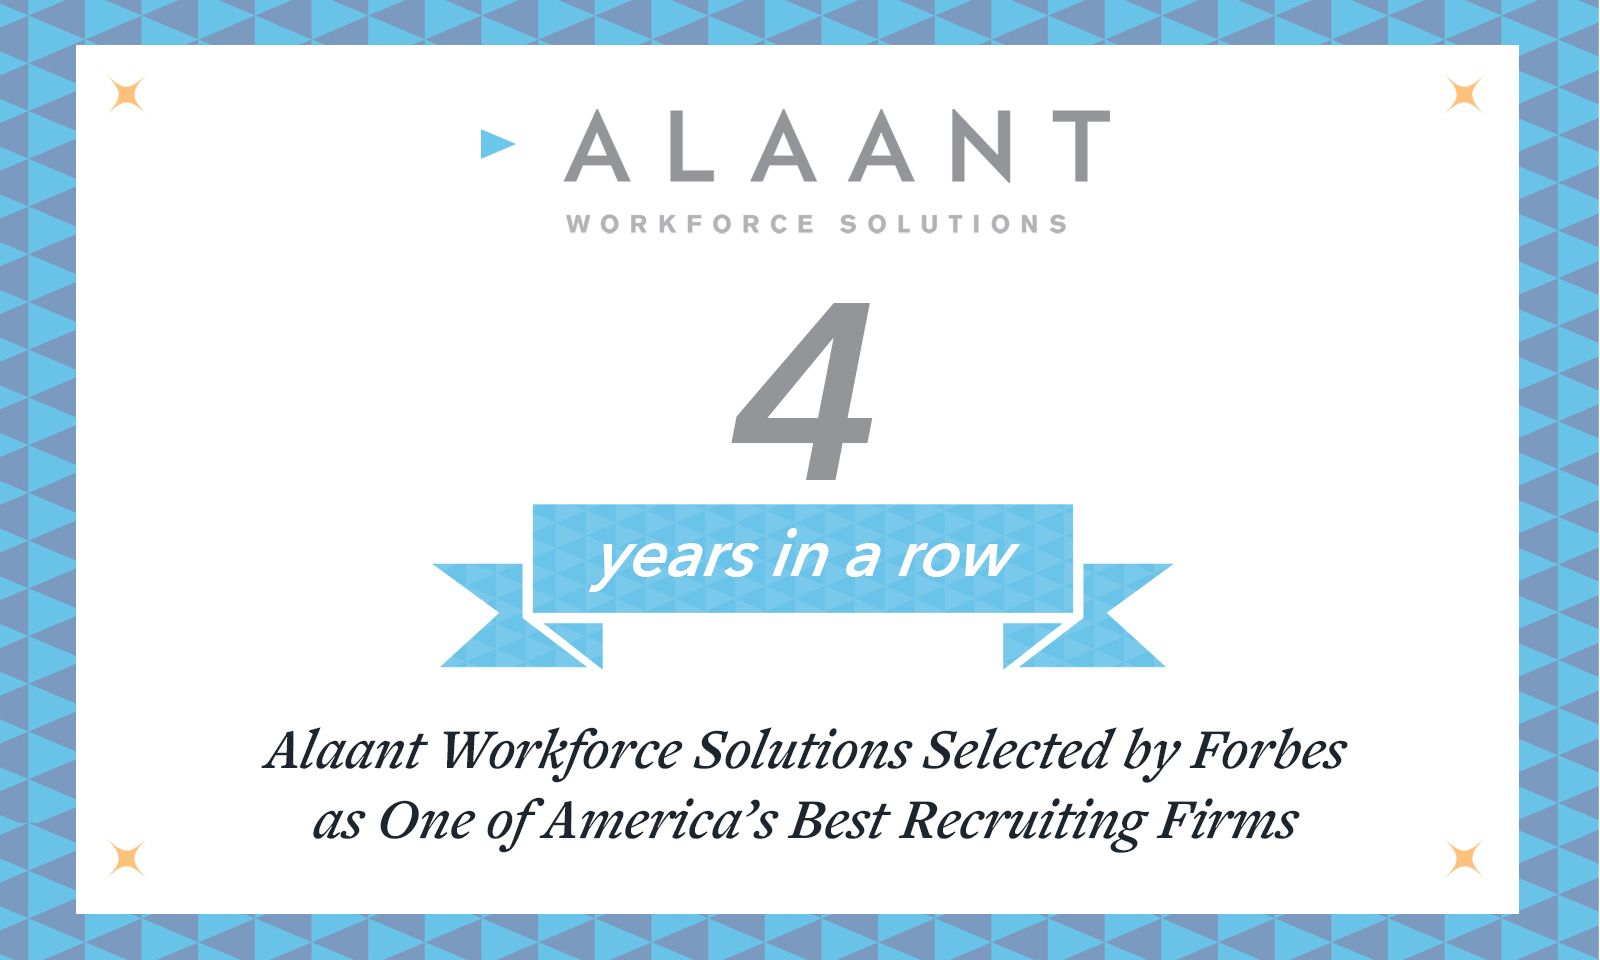 Alaant Workforce Solutions Selected by Forbes as One of America’s Best Recruiting Firms